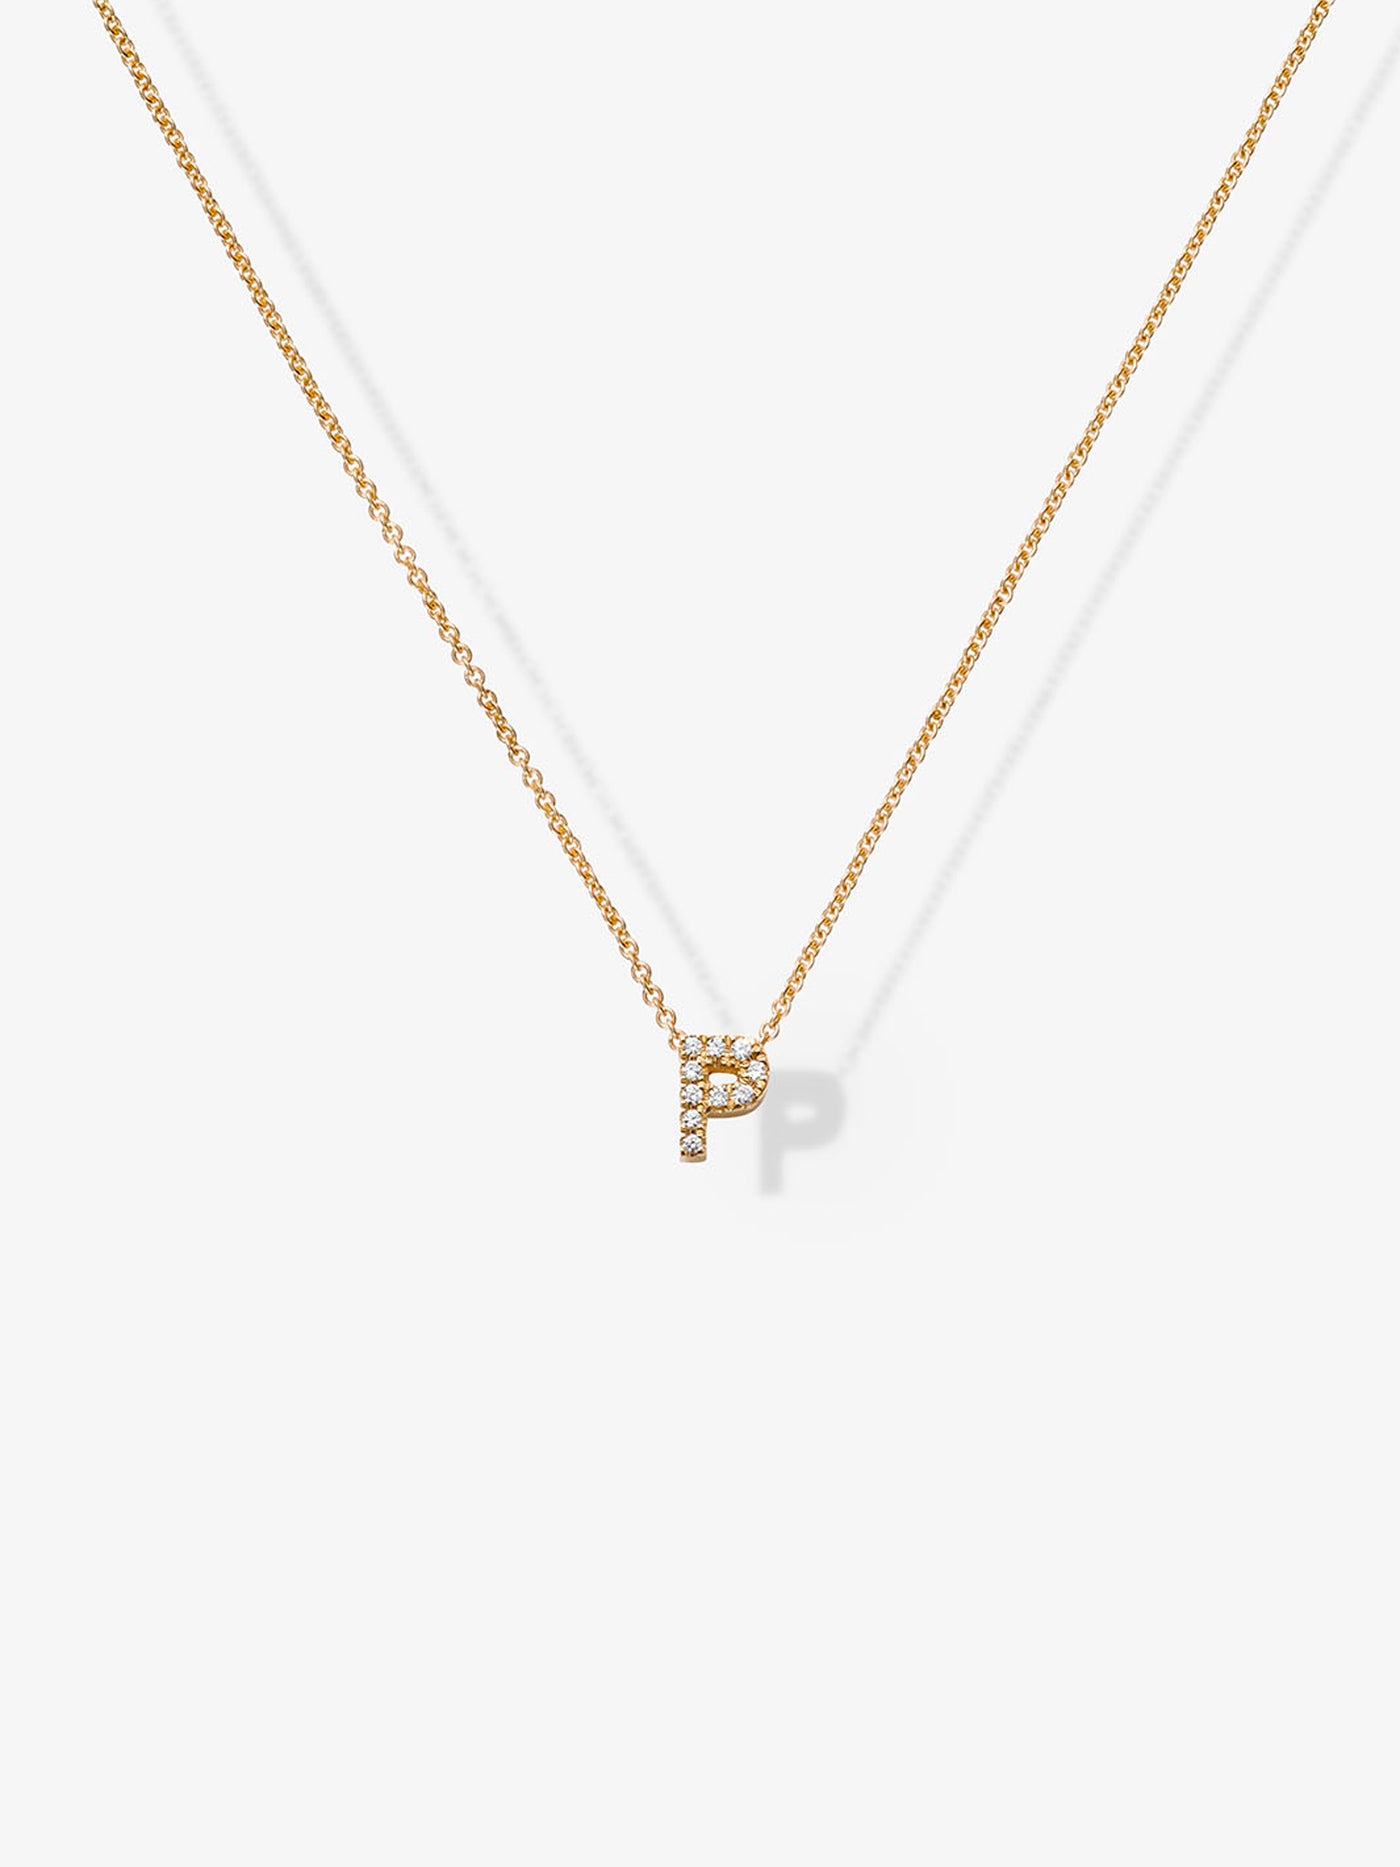 Letter P Necklace in Diamonds and 18k Gold